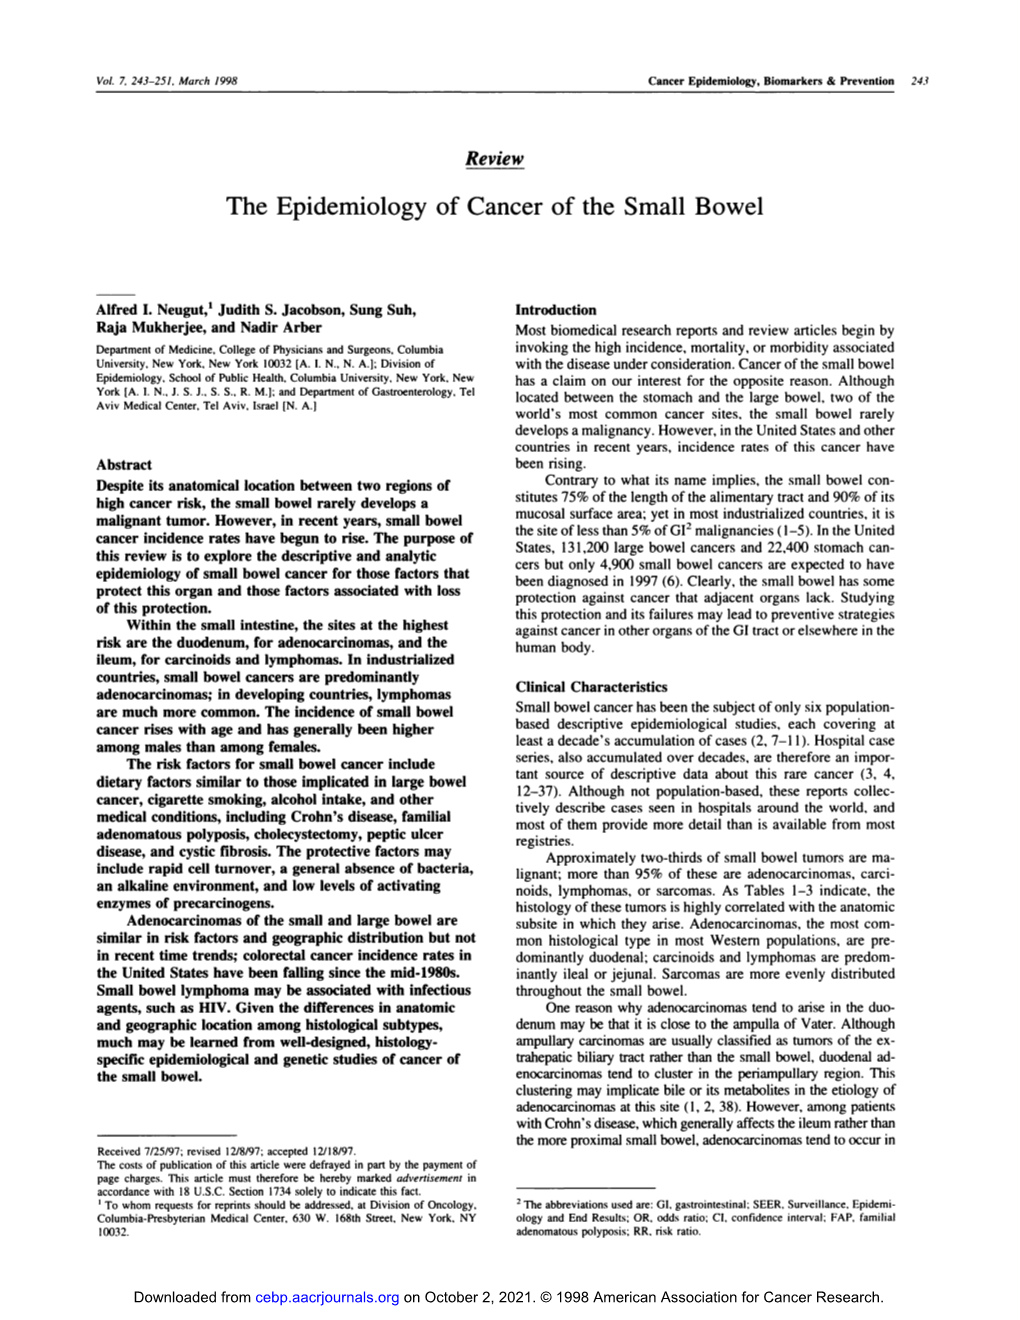 The Epidemiology of Cancer of the Small Bowel